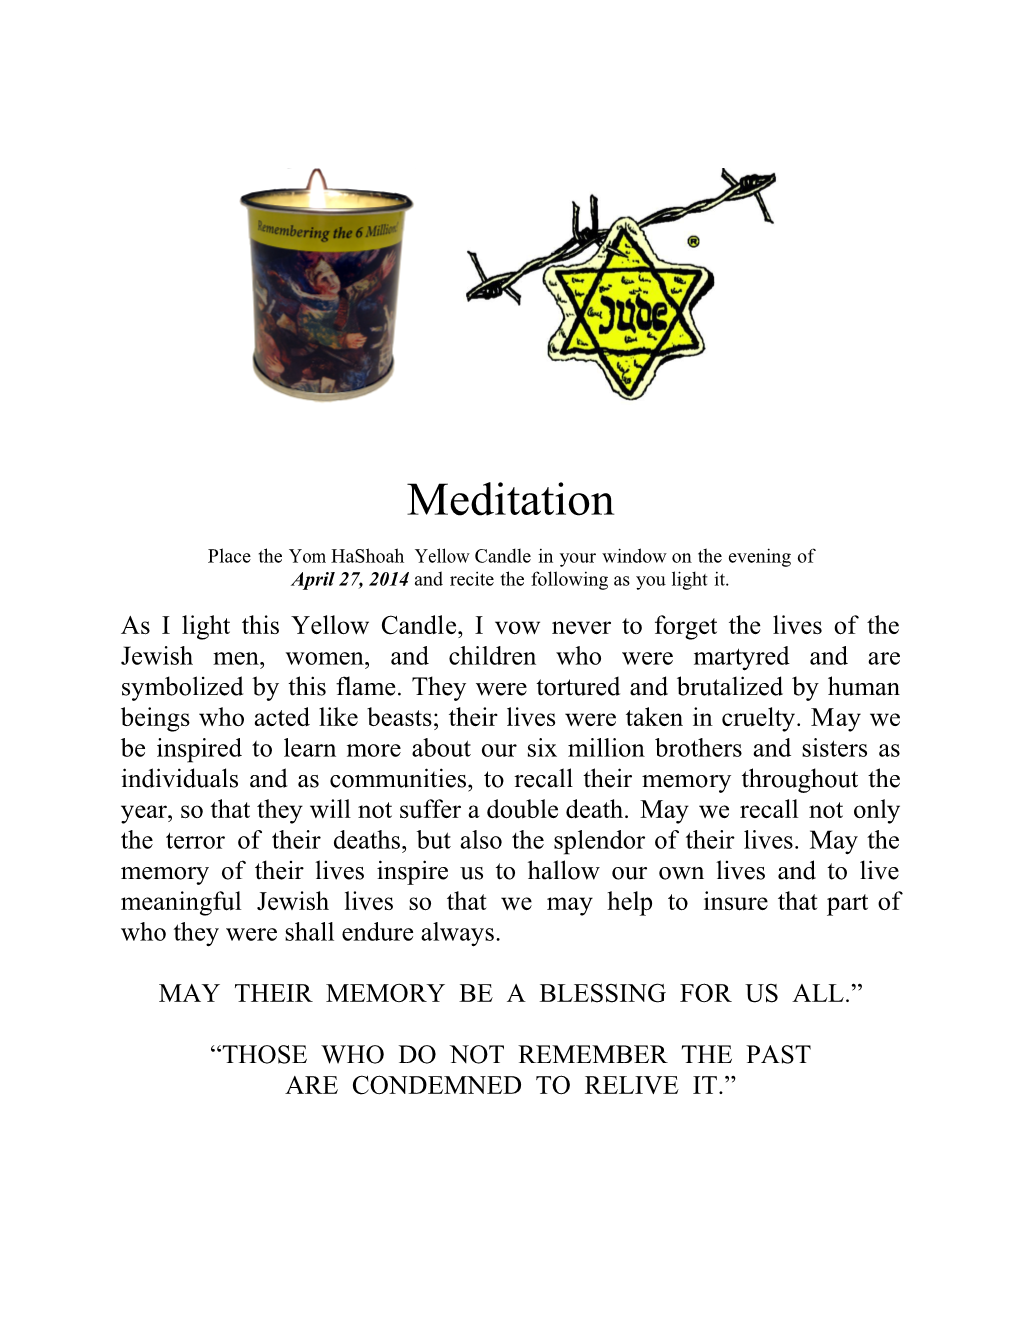 Place the Yom Hashoah Yellow Candle in Your Window on the Evening Of